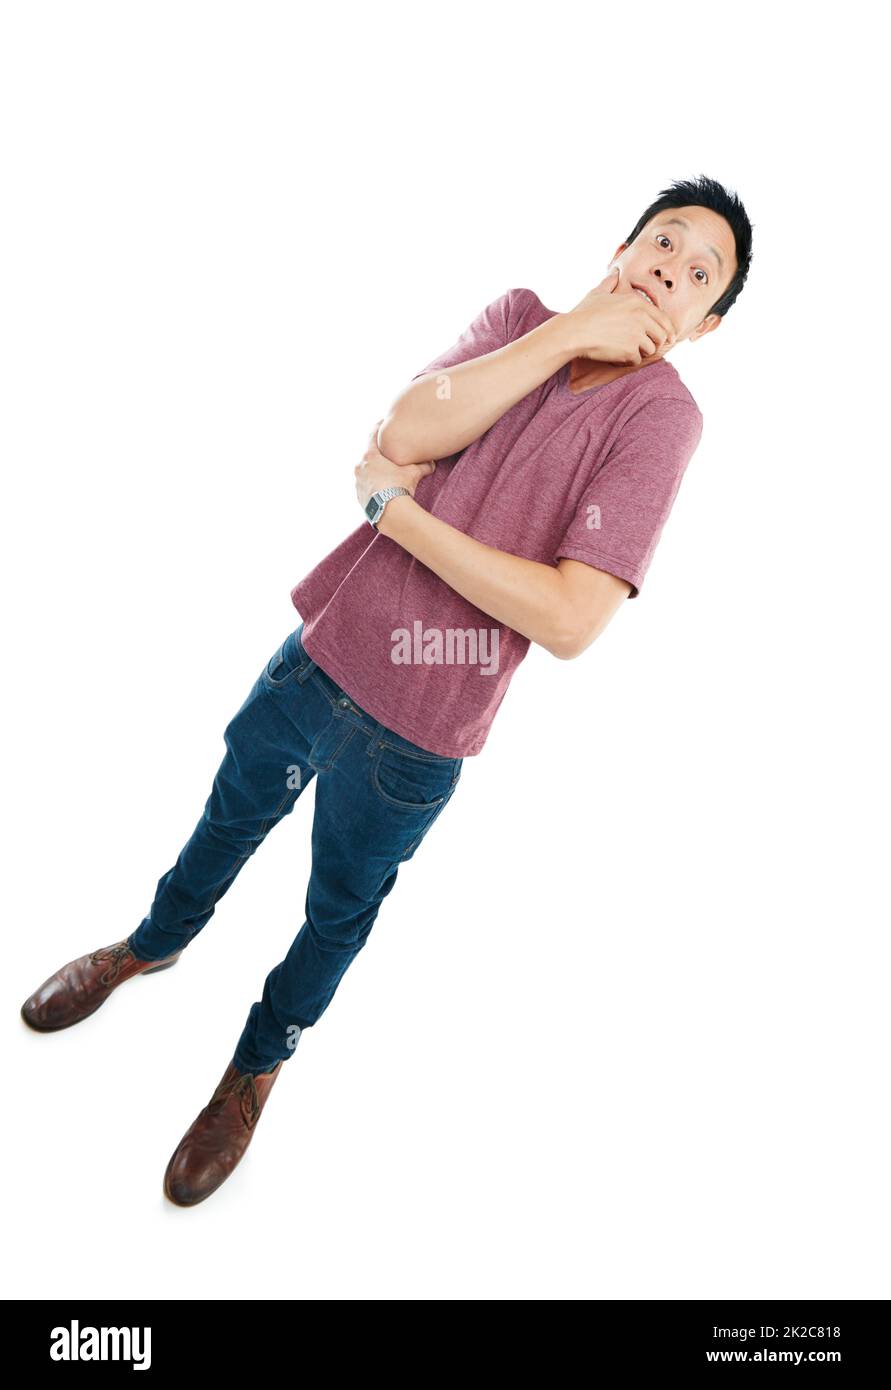 Is the world tilting, or is it just me. Tilted studio portrait of a young man looking tense against a white background. Stock Photo